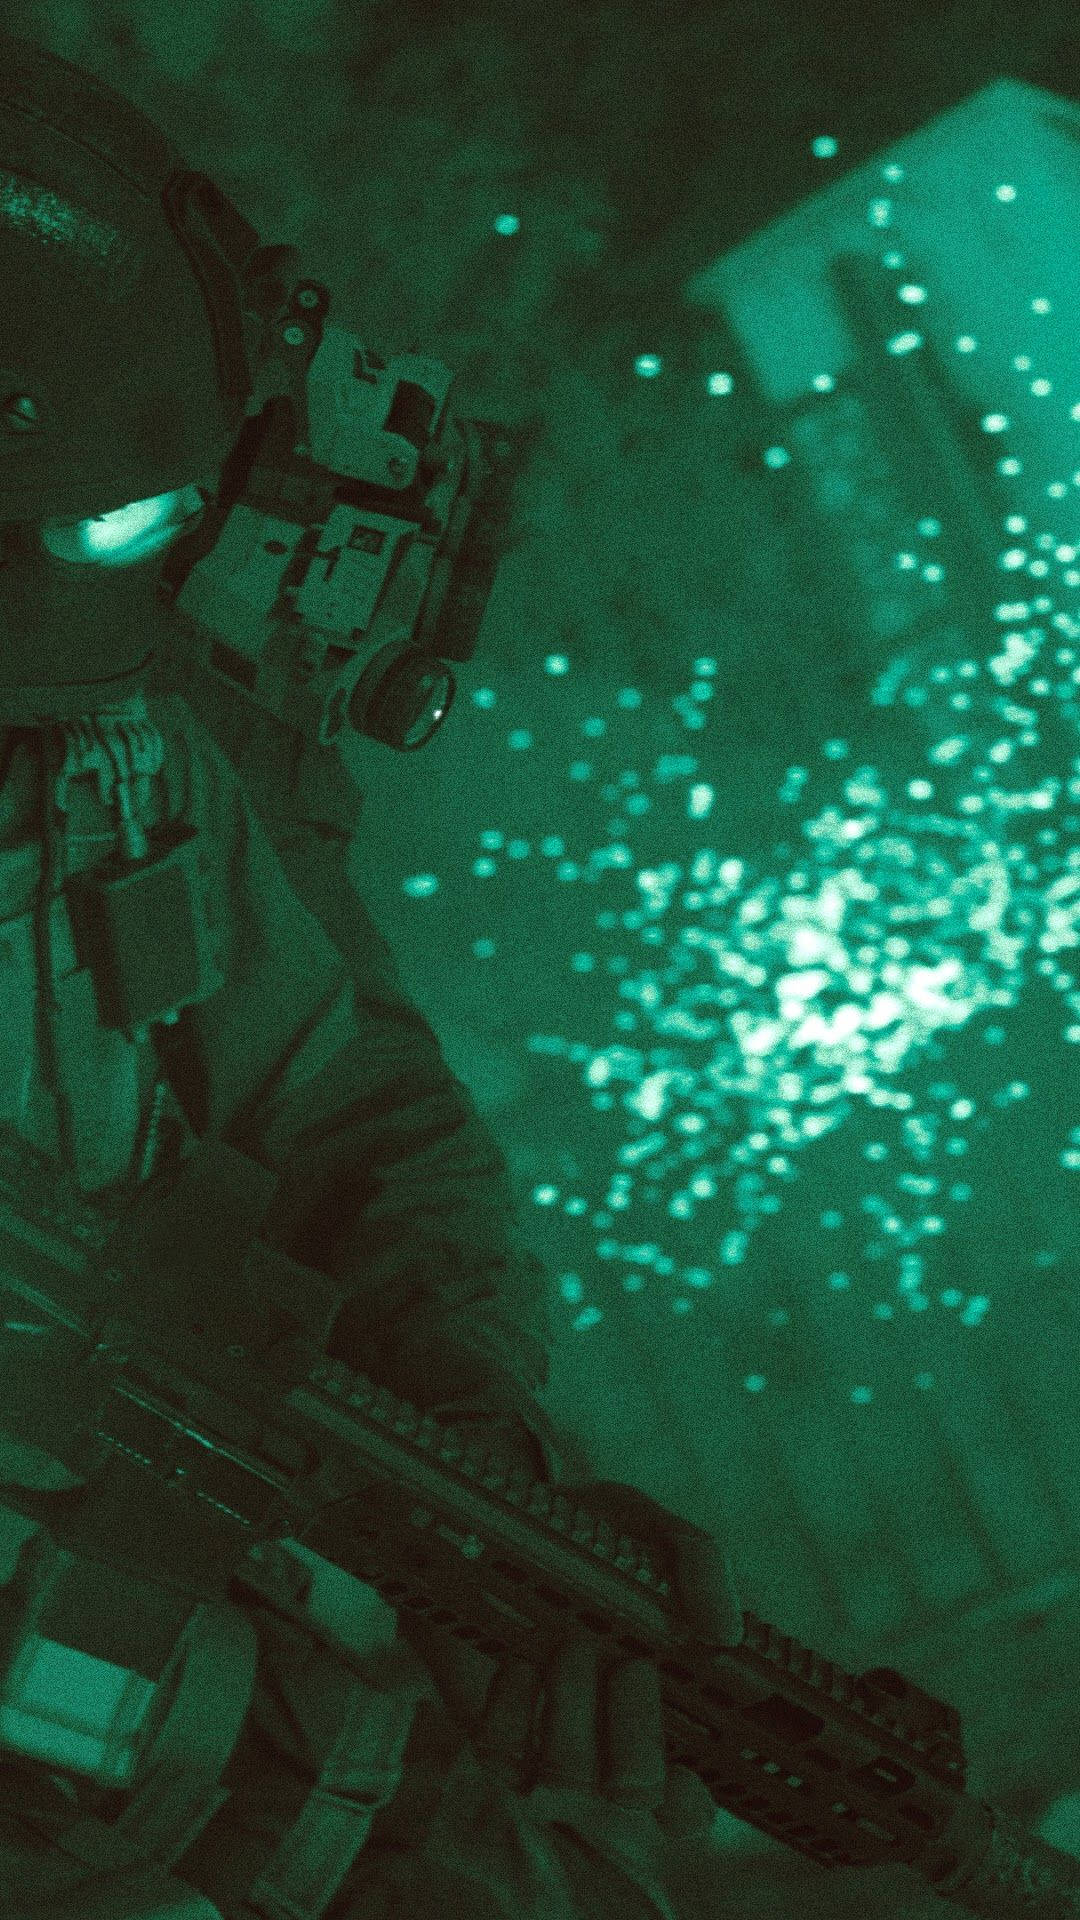 Cool Call Of Duty Modern Warfare iPhone Soldier Night-Vision Goggles Wallpaper